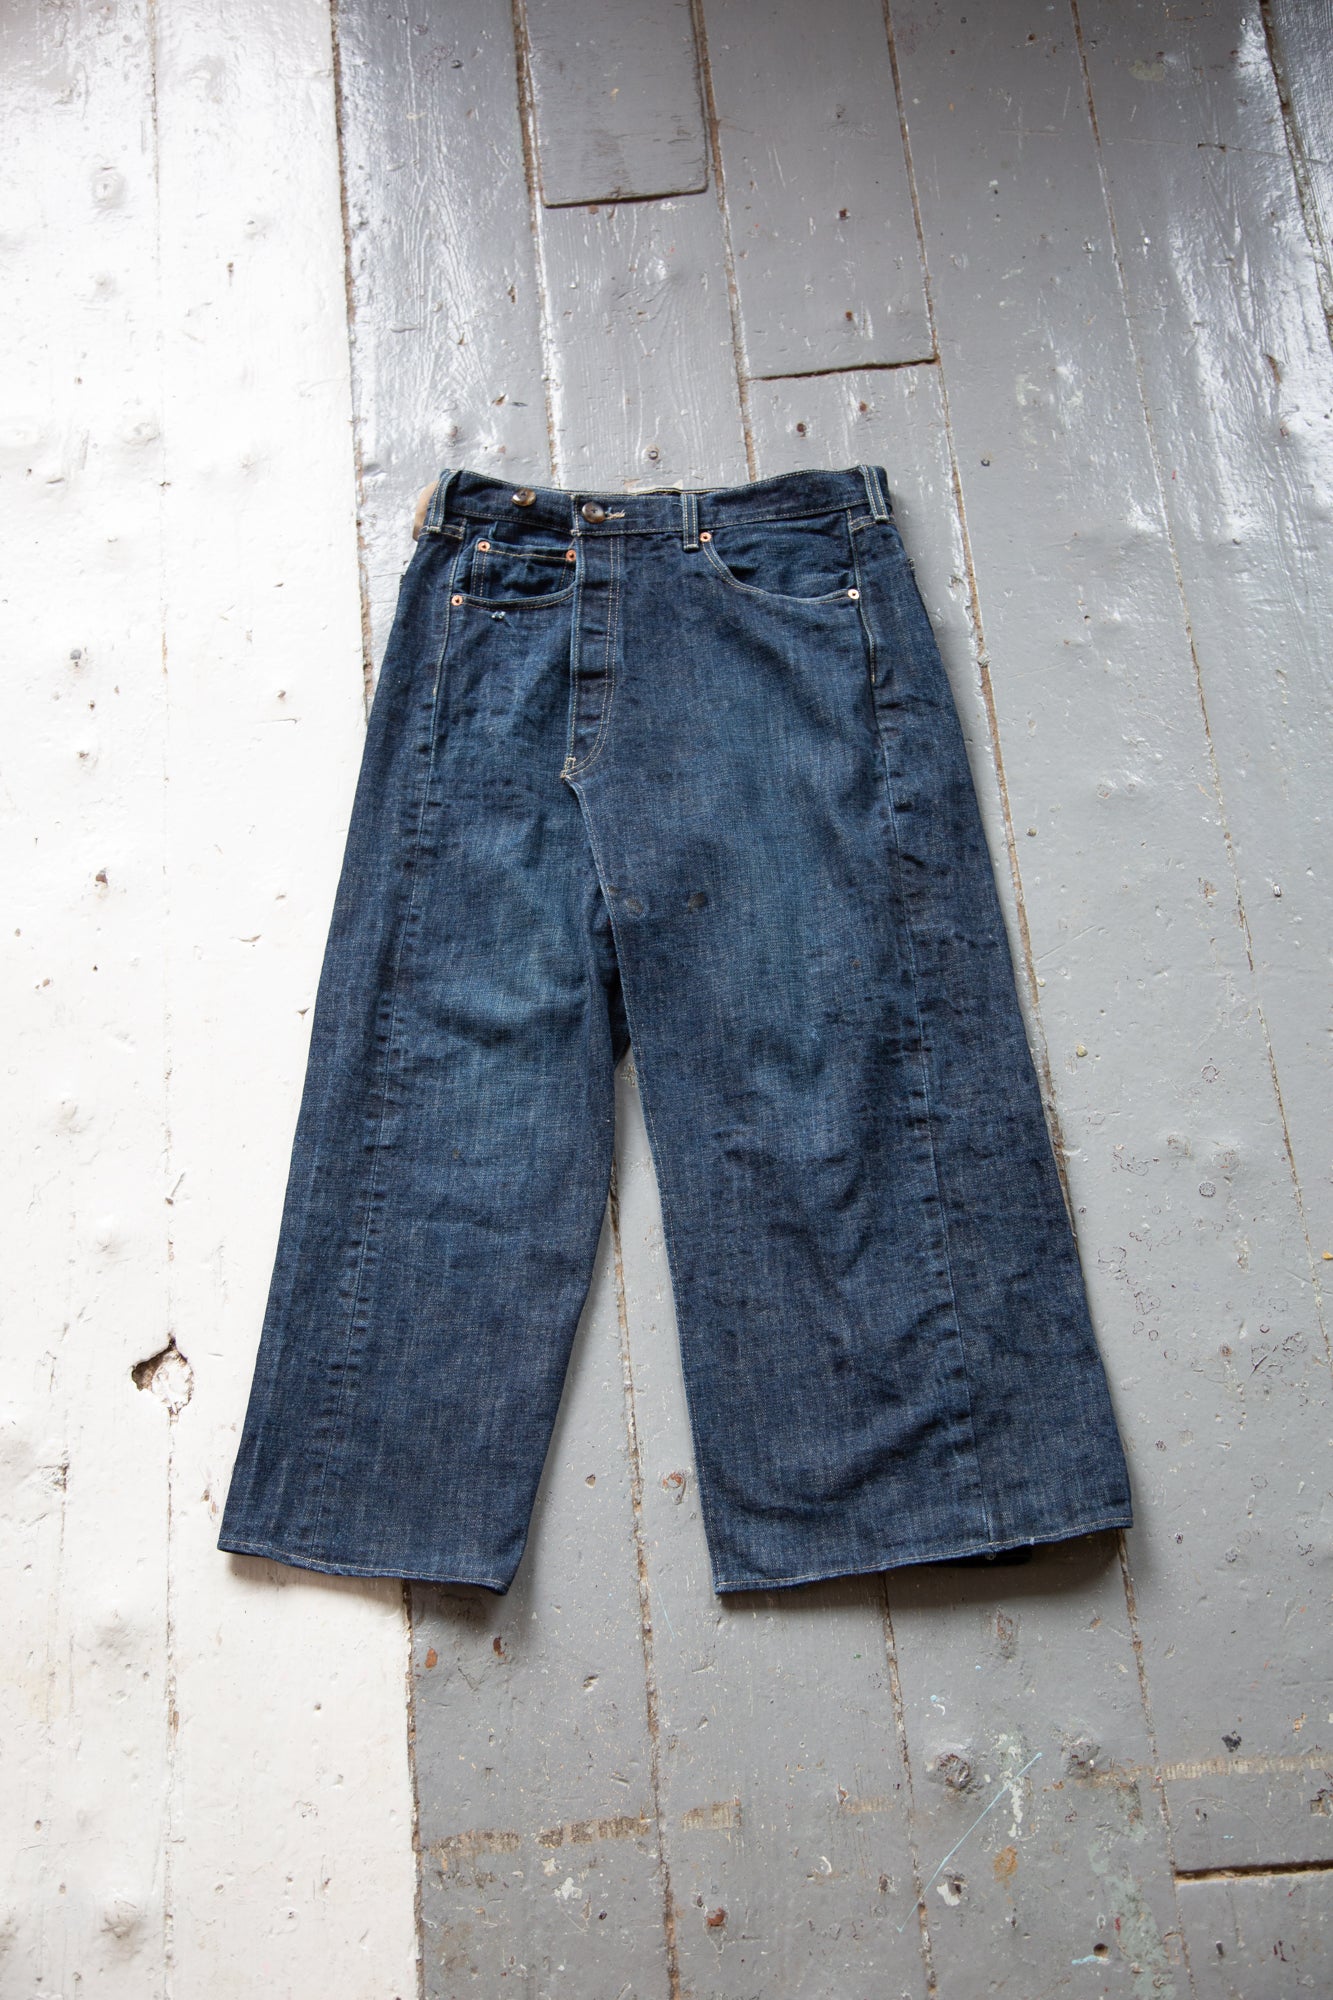 reconstructed Levi jeans